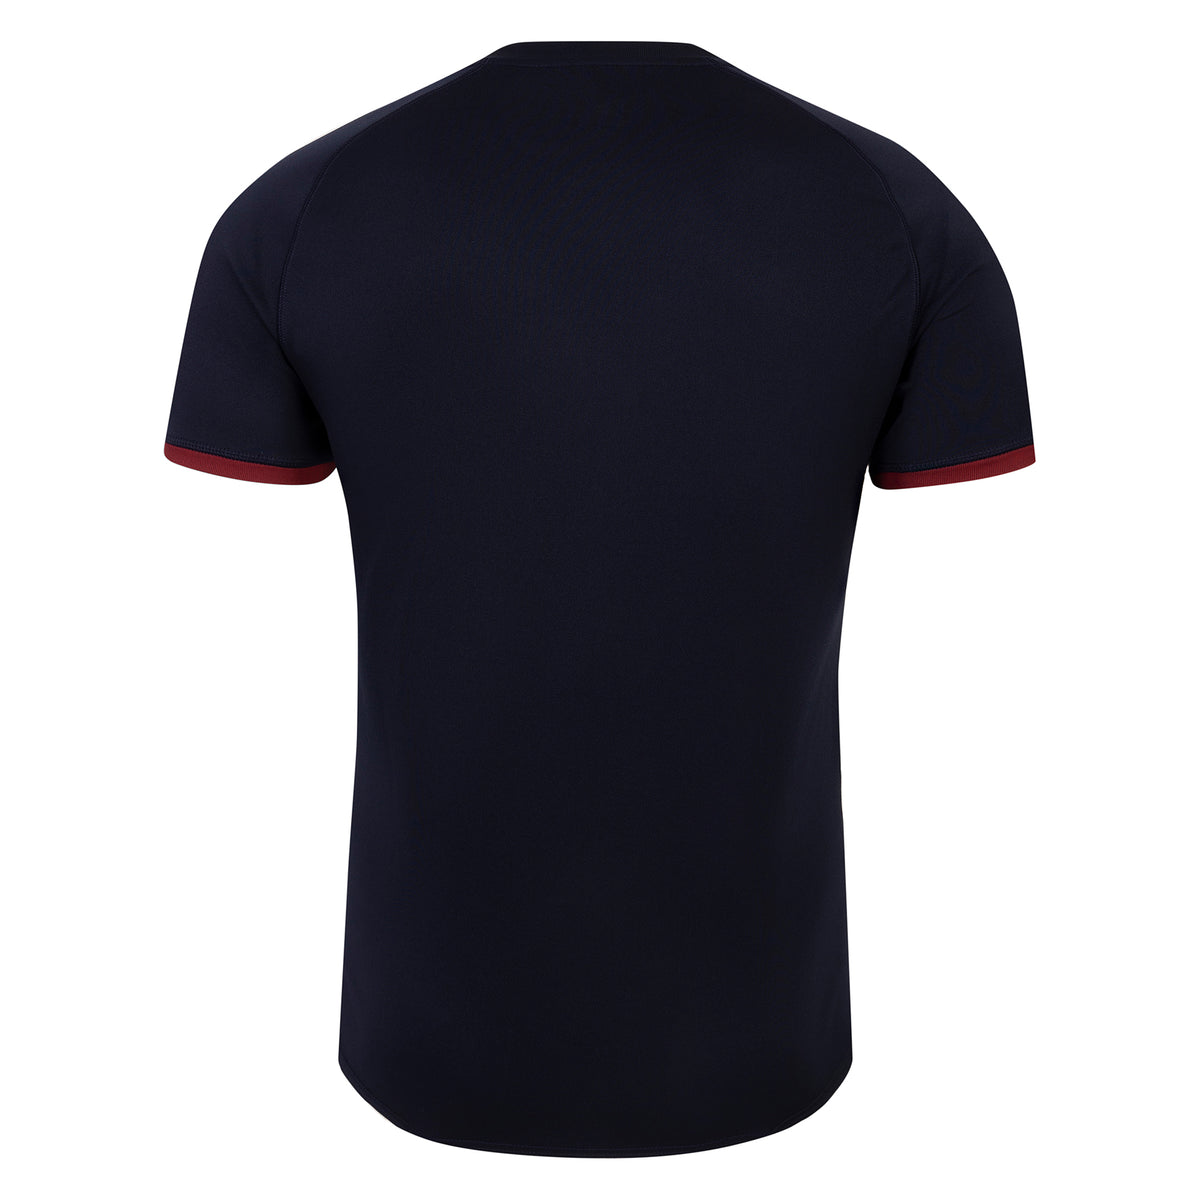 Umbro England Rugby World Cup Alternate Jersey Replica